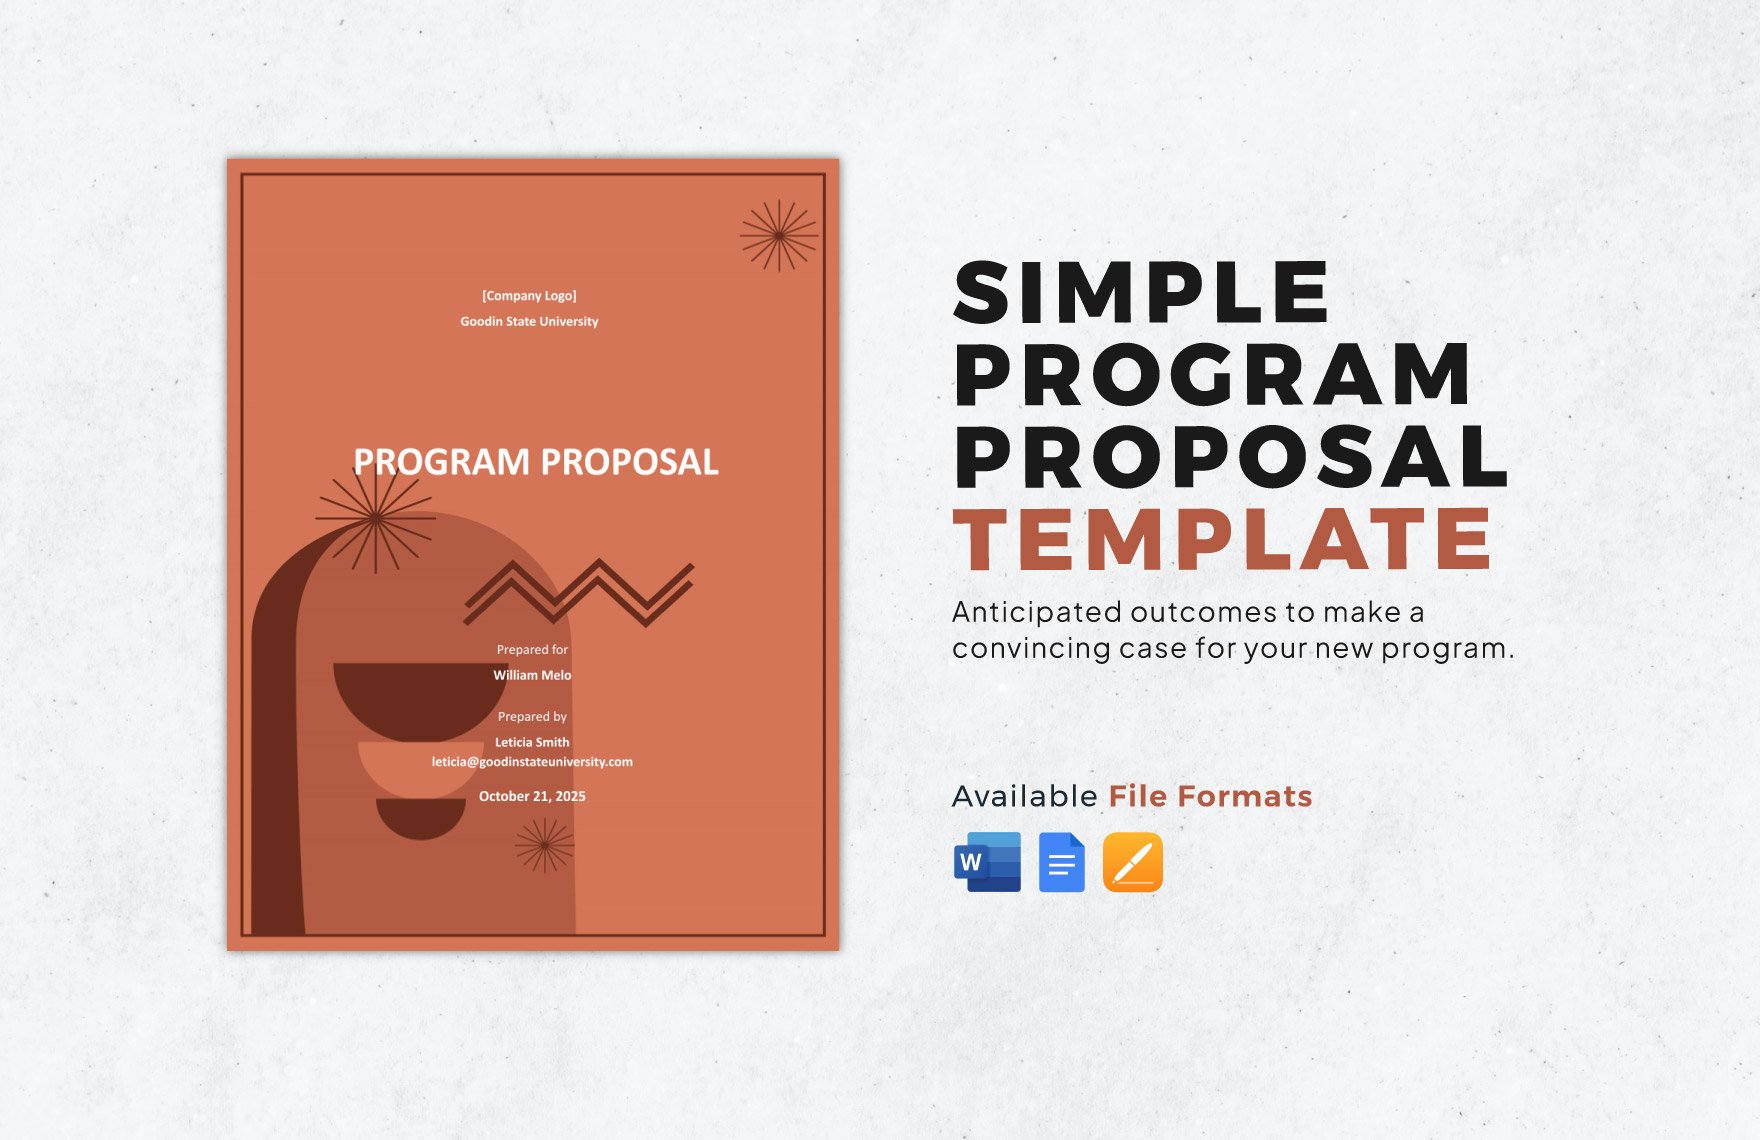 Simple Program Proposal Template in Word, Google Docs, Apple Pages